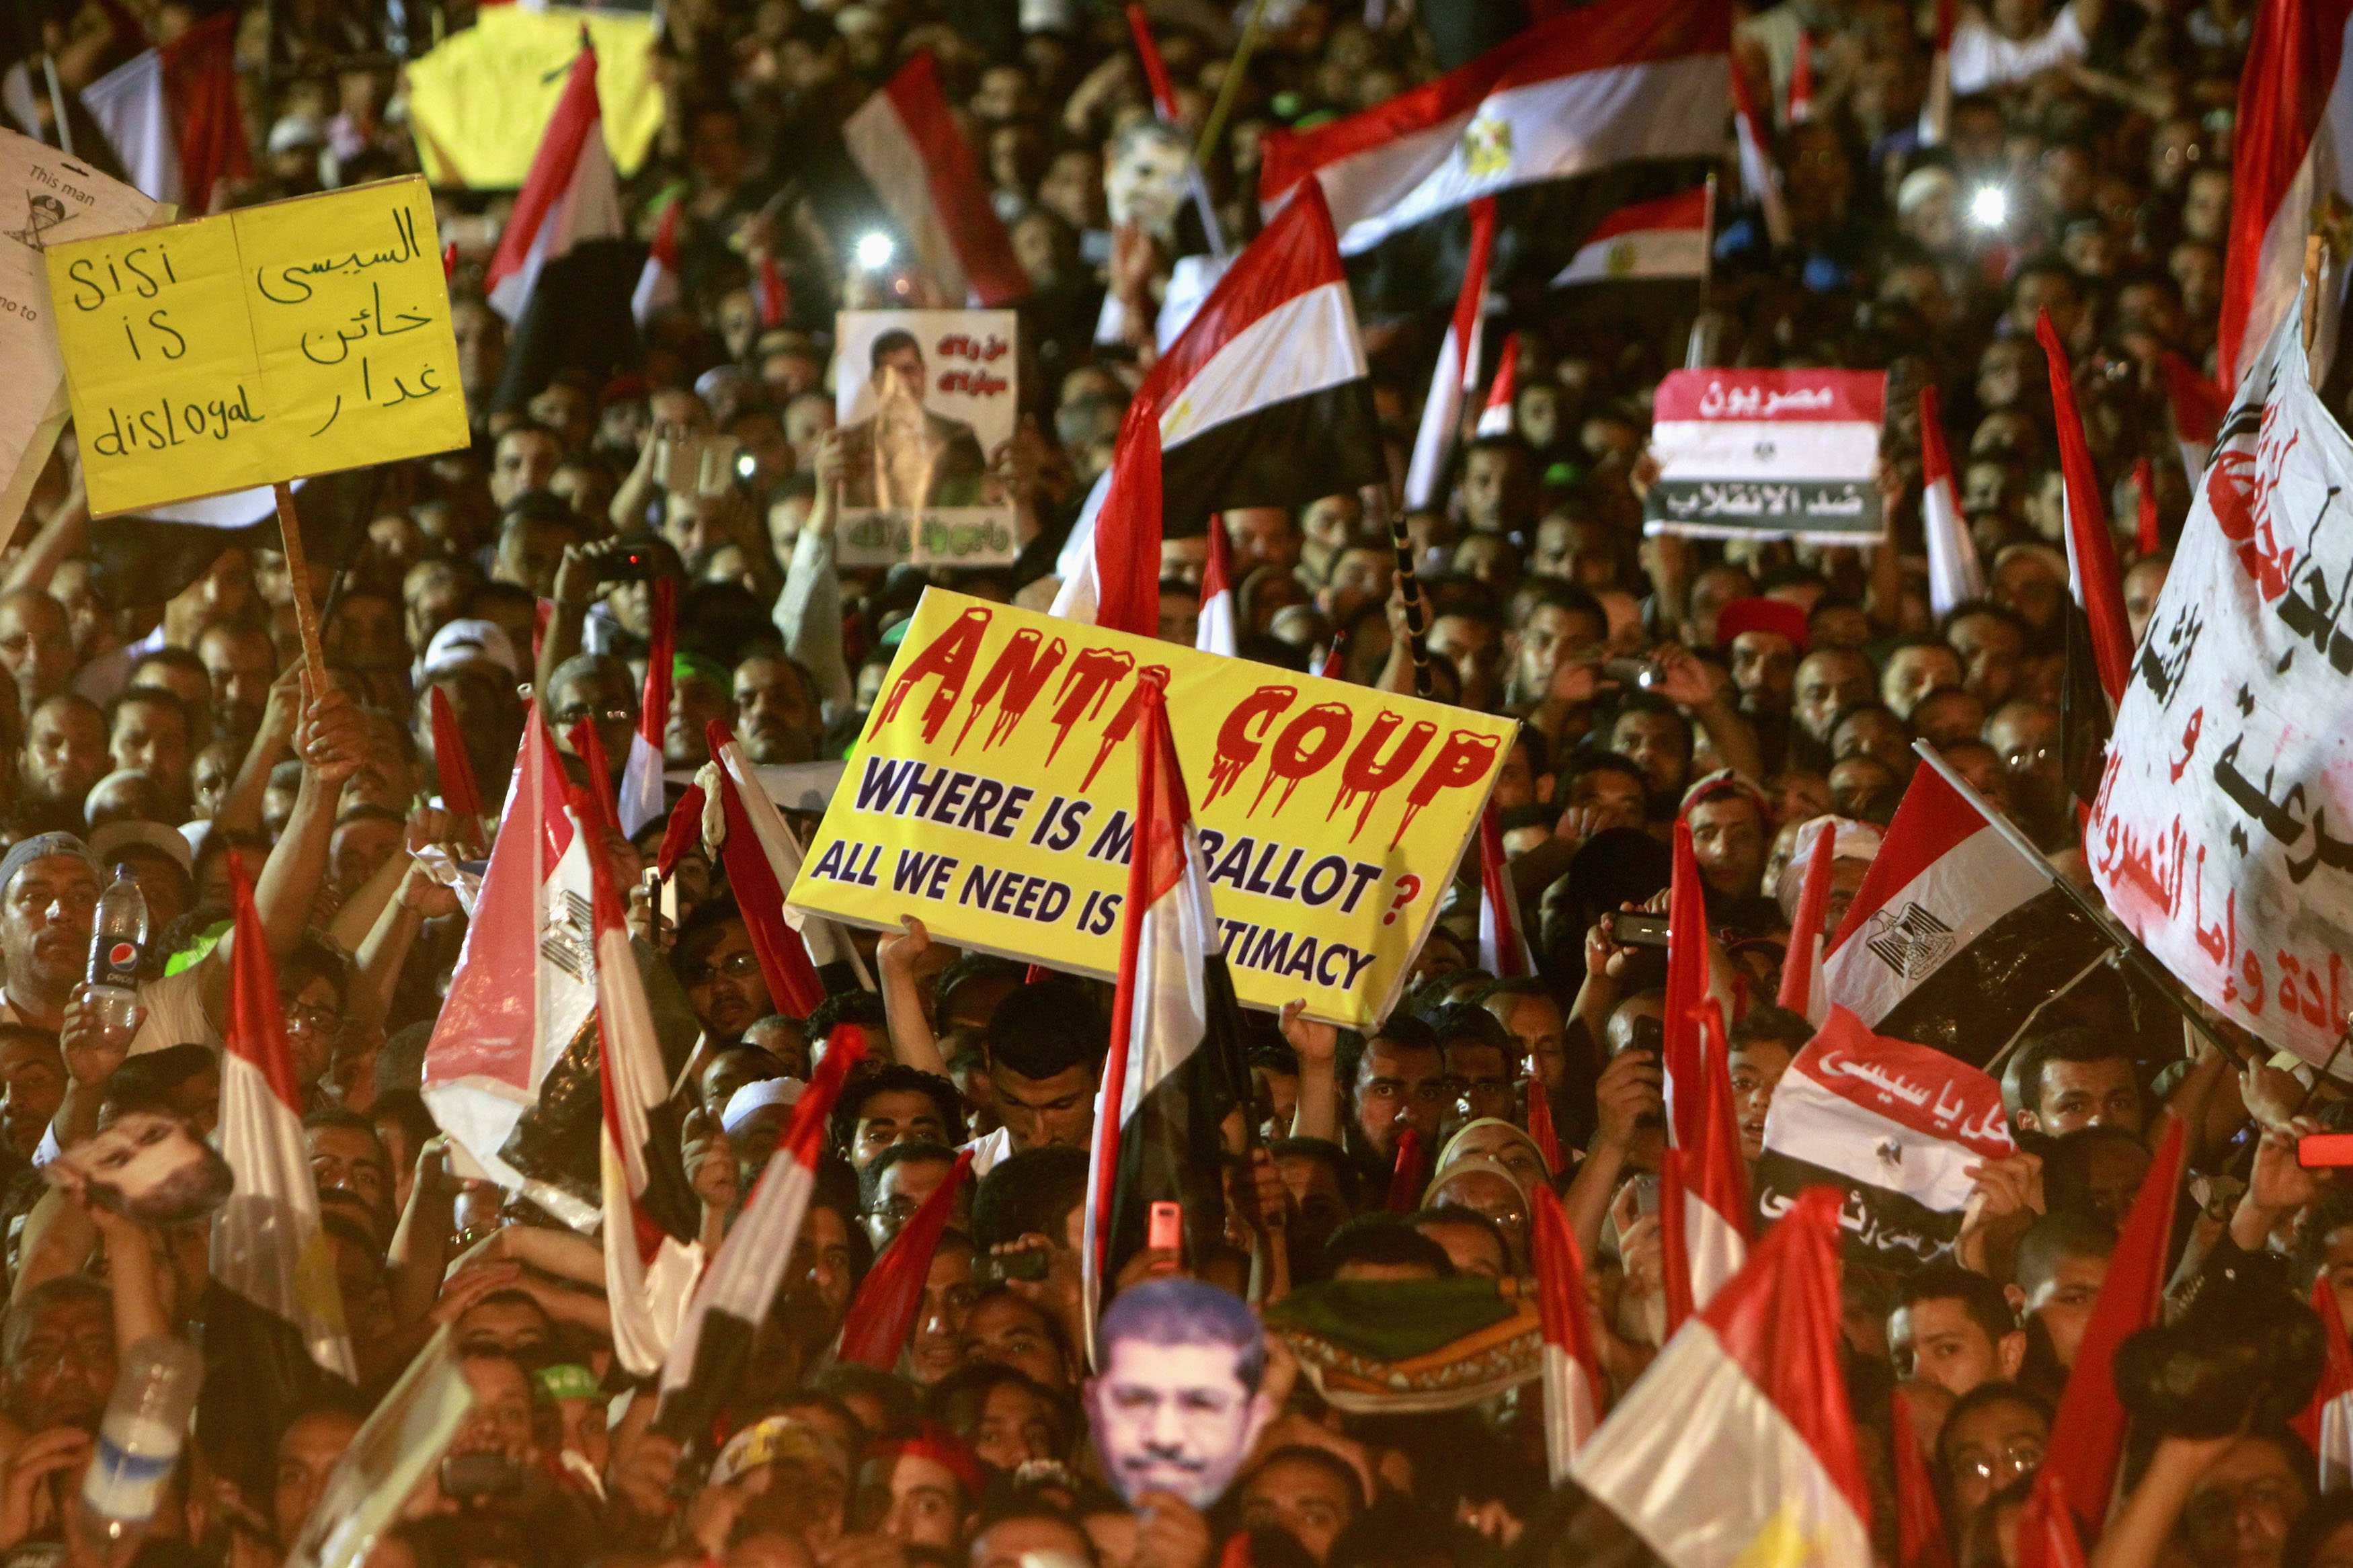 Members of the Muslim Brotherhood and supporters of deposed Egyptian President Mohammed Mursi wave Egyptian flags, signs and masks of him as they gather at the Rabaa Adawiya square  in Cairo, where they are camping. Photo: Reuters